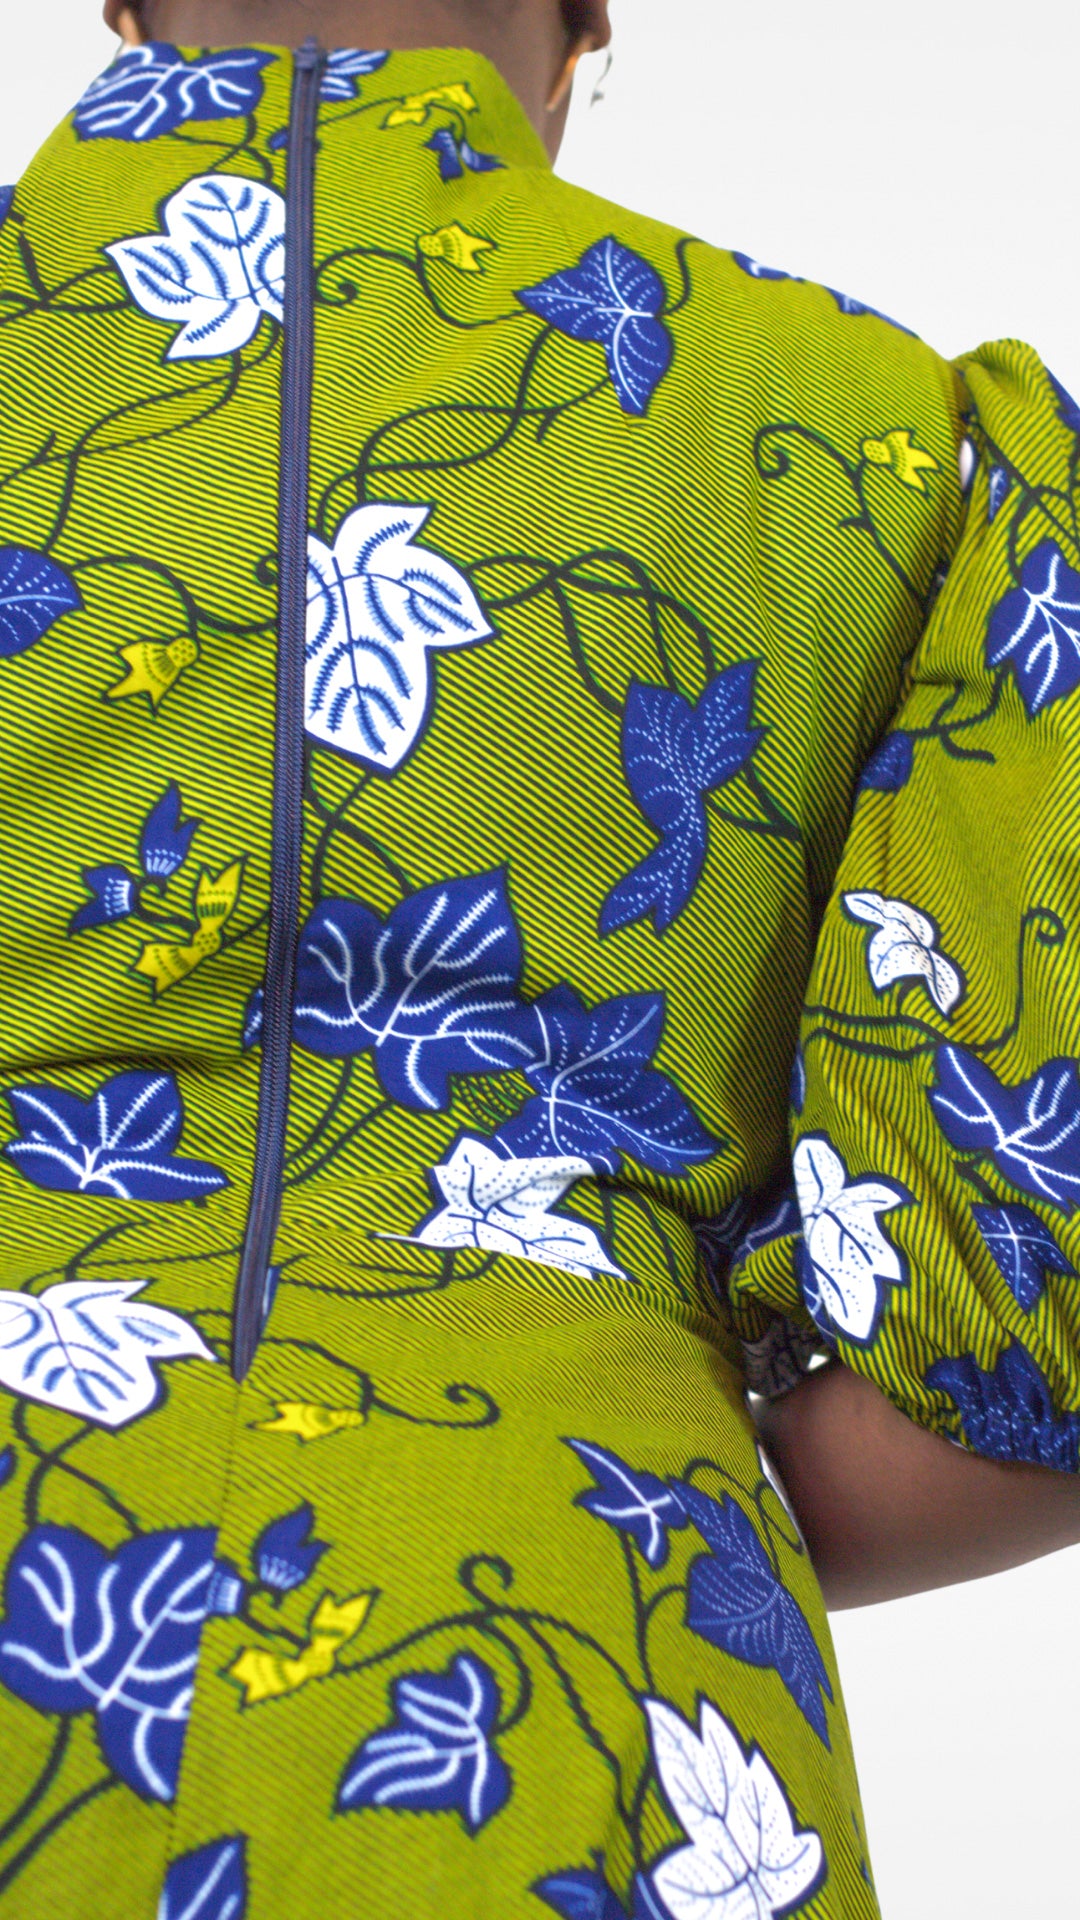 A close up rear view of the khaki dress, showcasing the zipper closure at the back and the enchanting blue and white pattern.